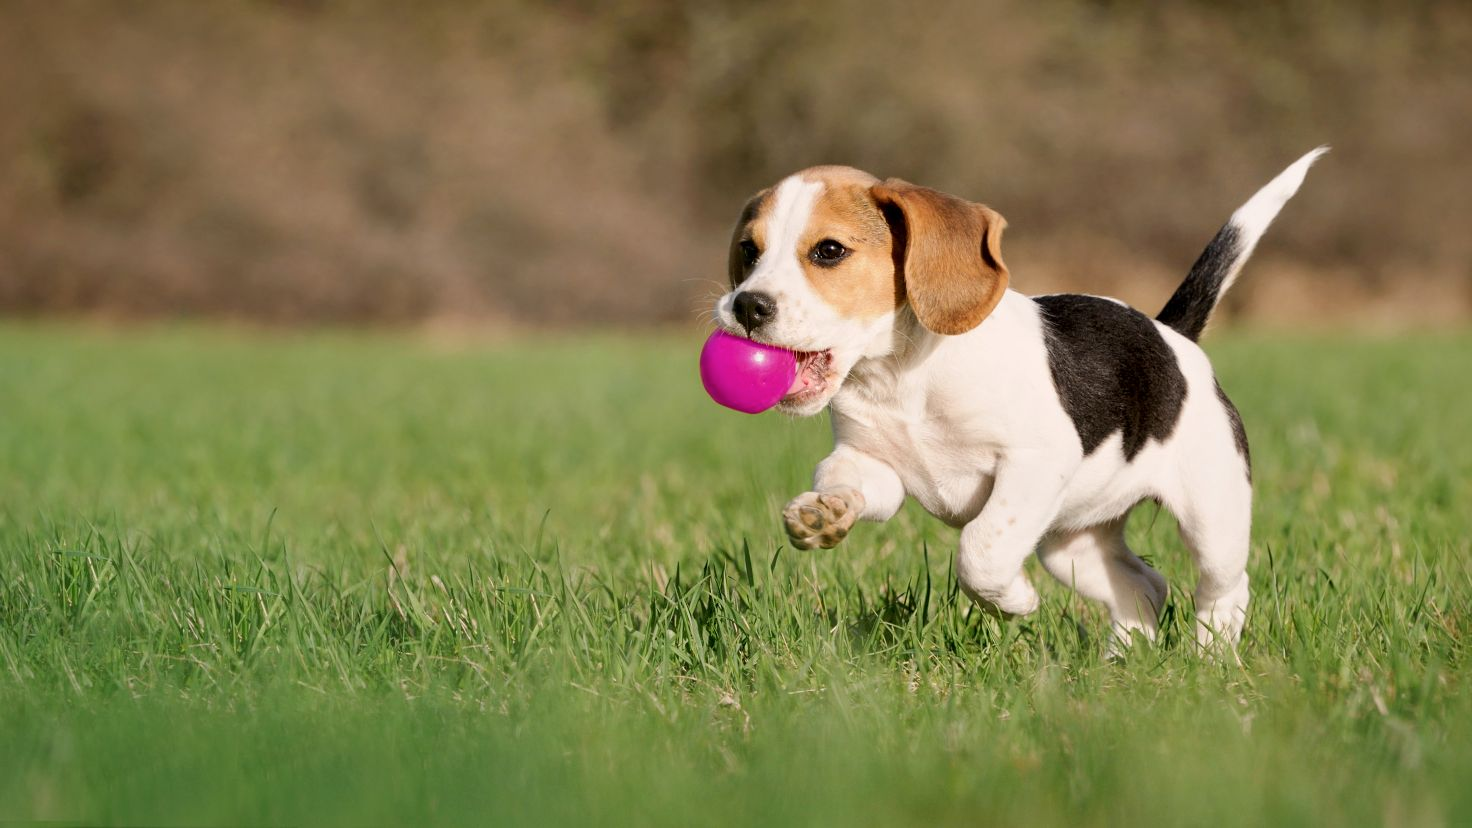 Beagle puppy running with pink ball in his mouth